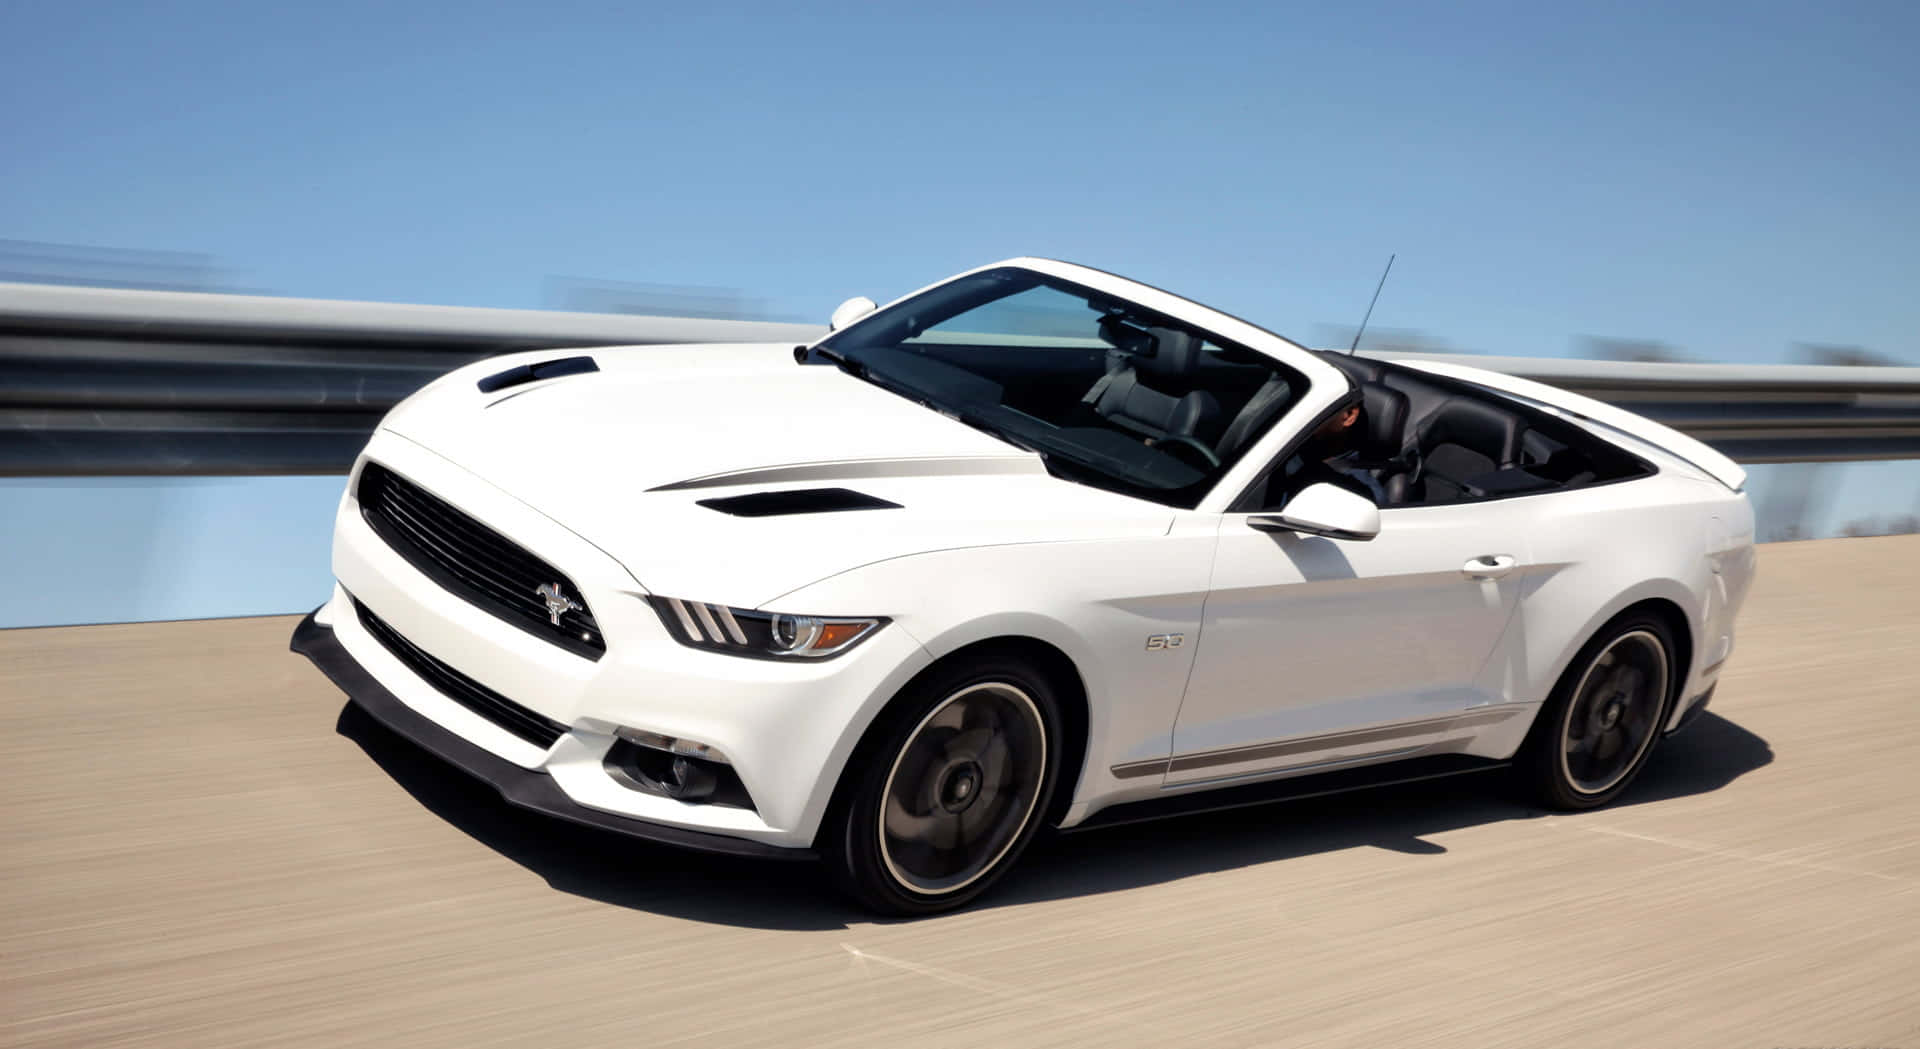 Caption: Sleek Ford Mustang Gt Convertible Cruising On The Highway Wallpaper